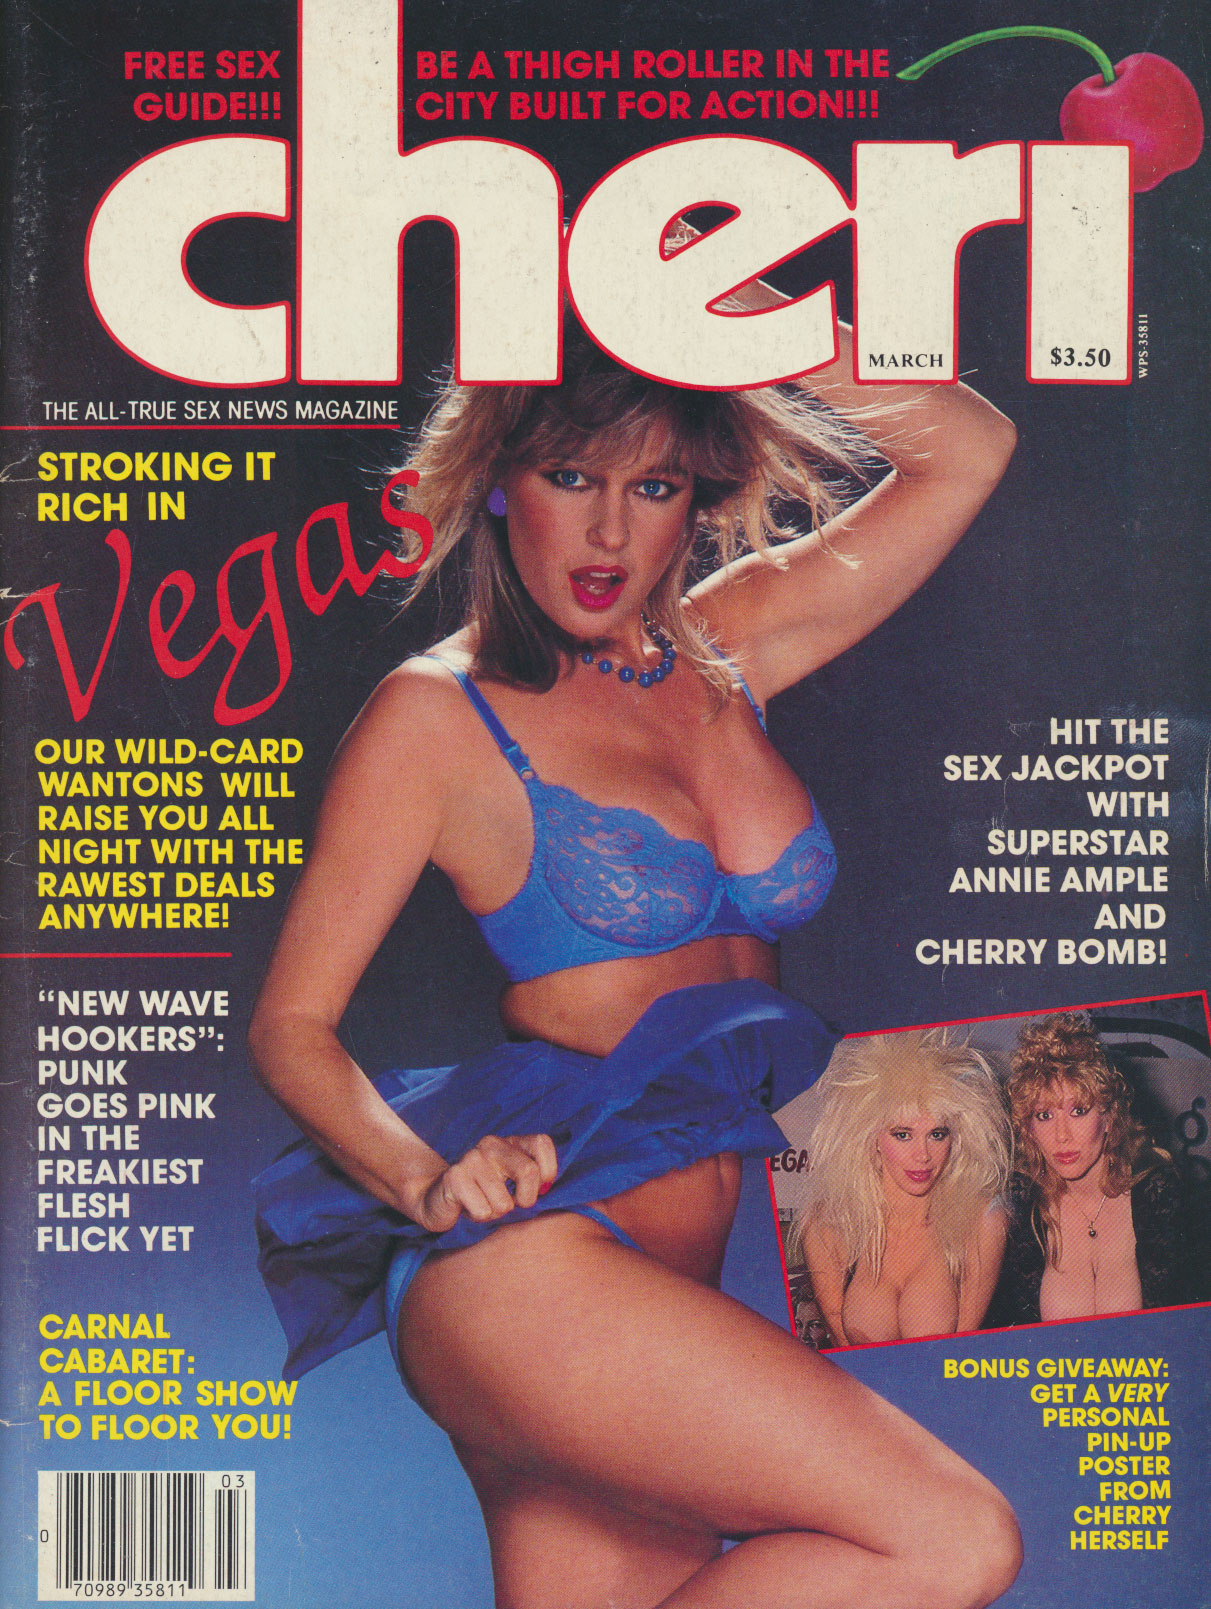 Cheri March 1985 magazine back issue Cheri magizine back copy Cheri March 1985 Adult Vintage Magazine Back Issue Published by Cheri Publishing Group. Stroking It Vegas Our Wild-Card Wantons Will Raise You All Night With The Rawest Deals Anywhere.